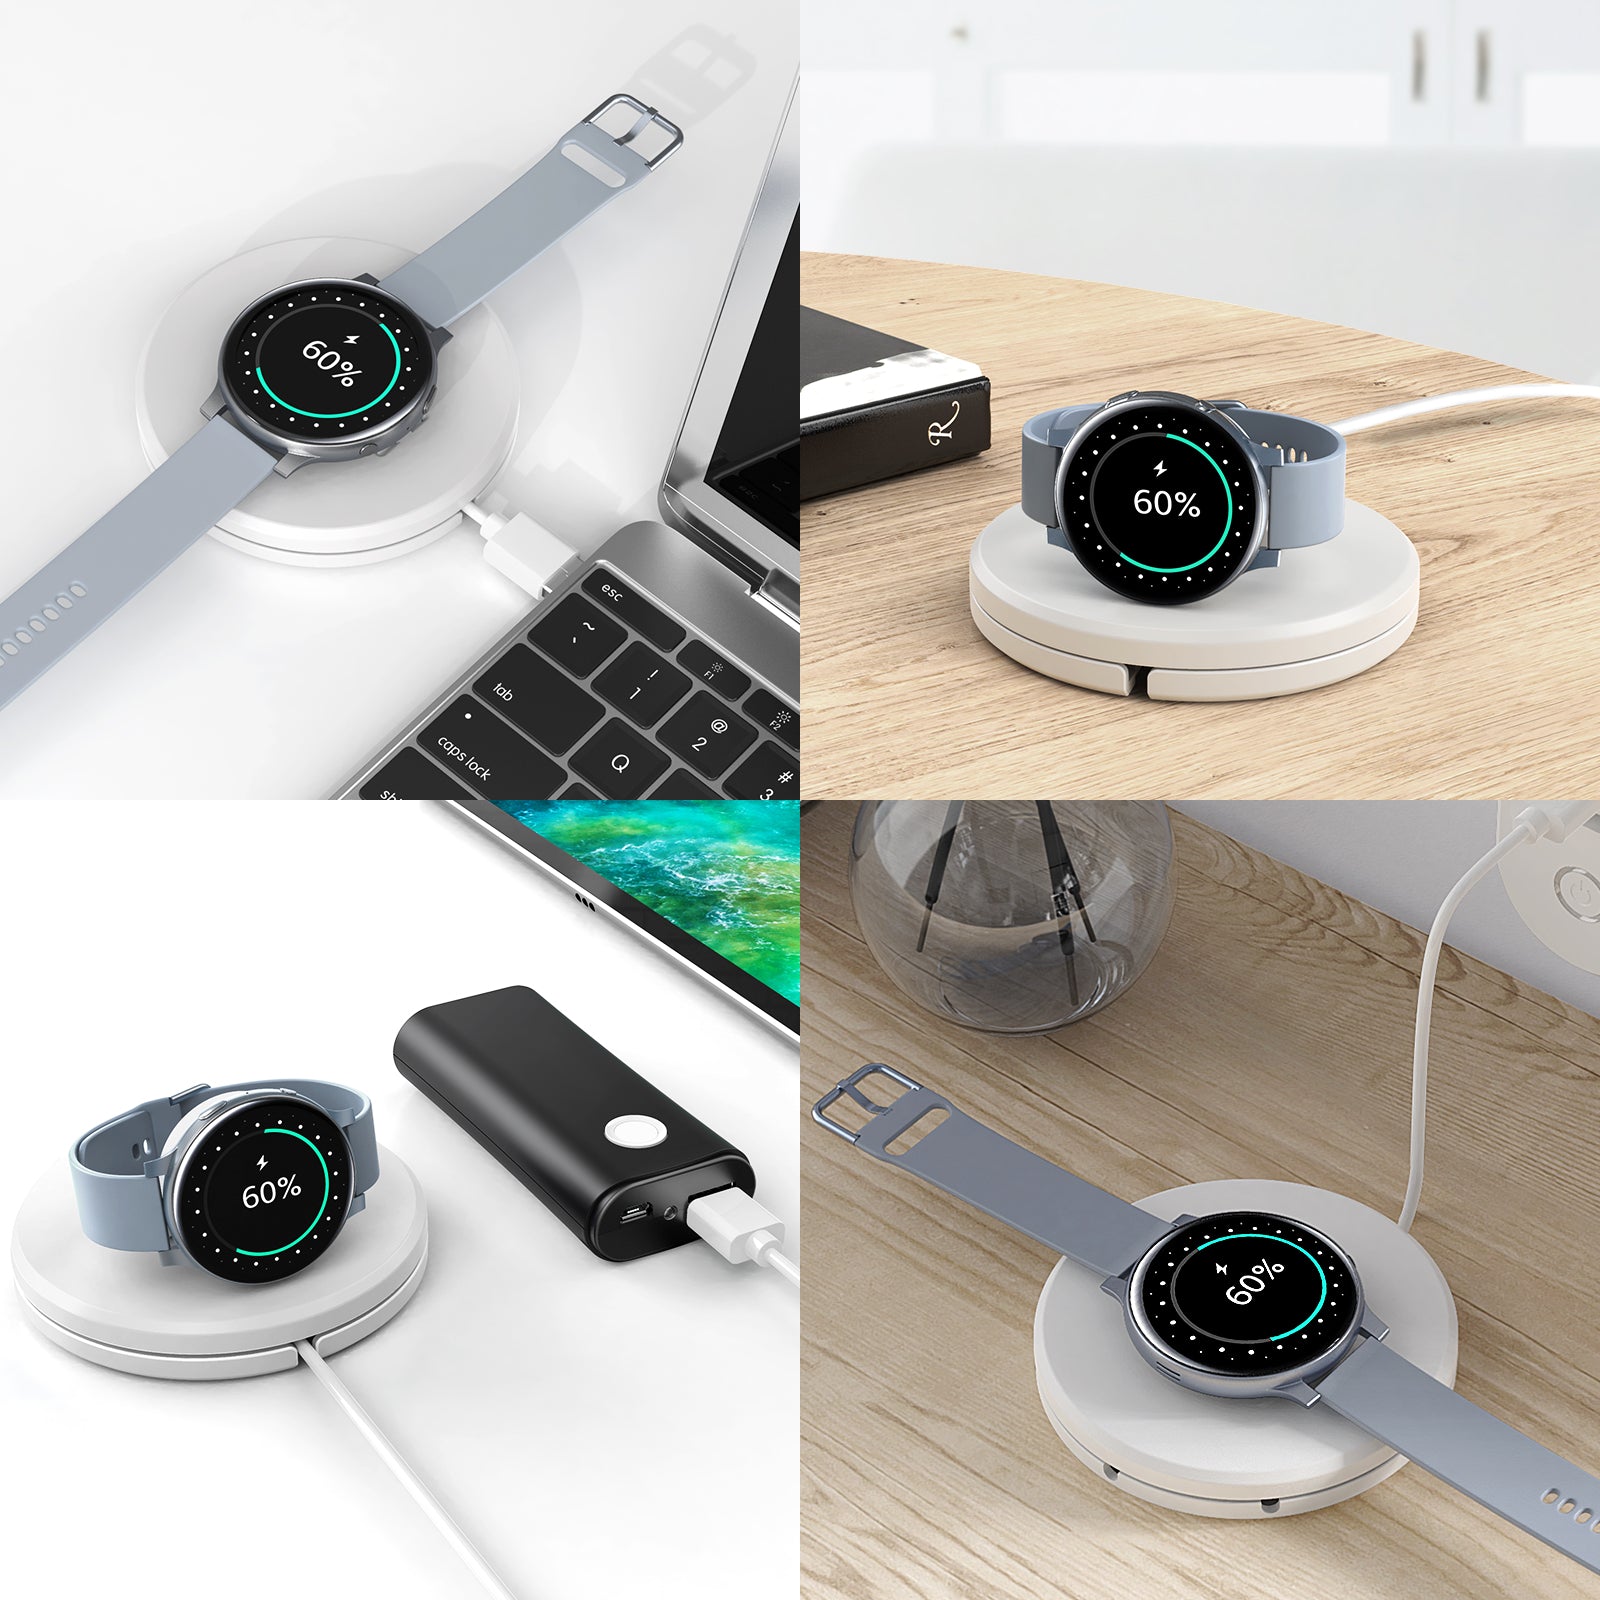 QS-03 Portable Folding Wireless Charger Cable Winder Stand Dock for Samsung Galaxy Watch Active/Active2/Watch3 - White